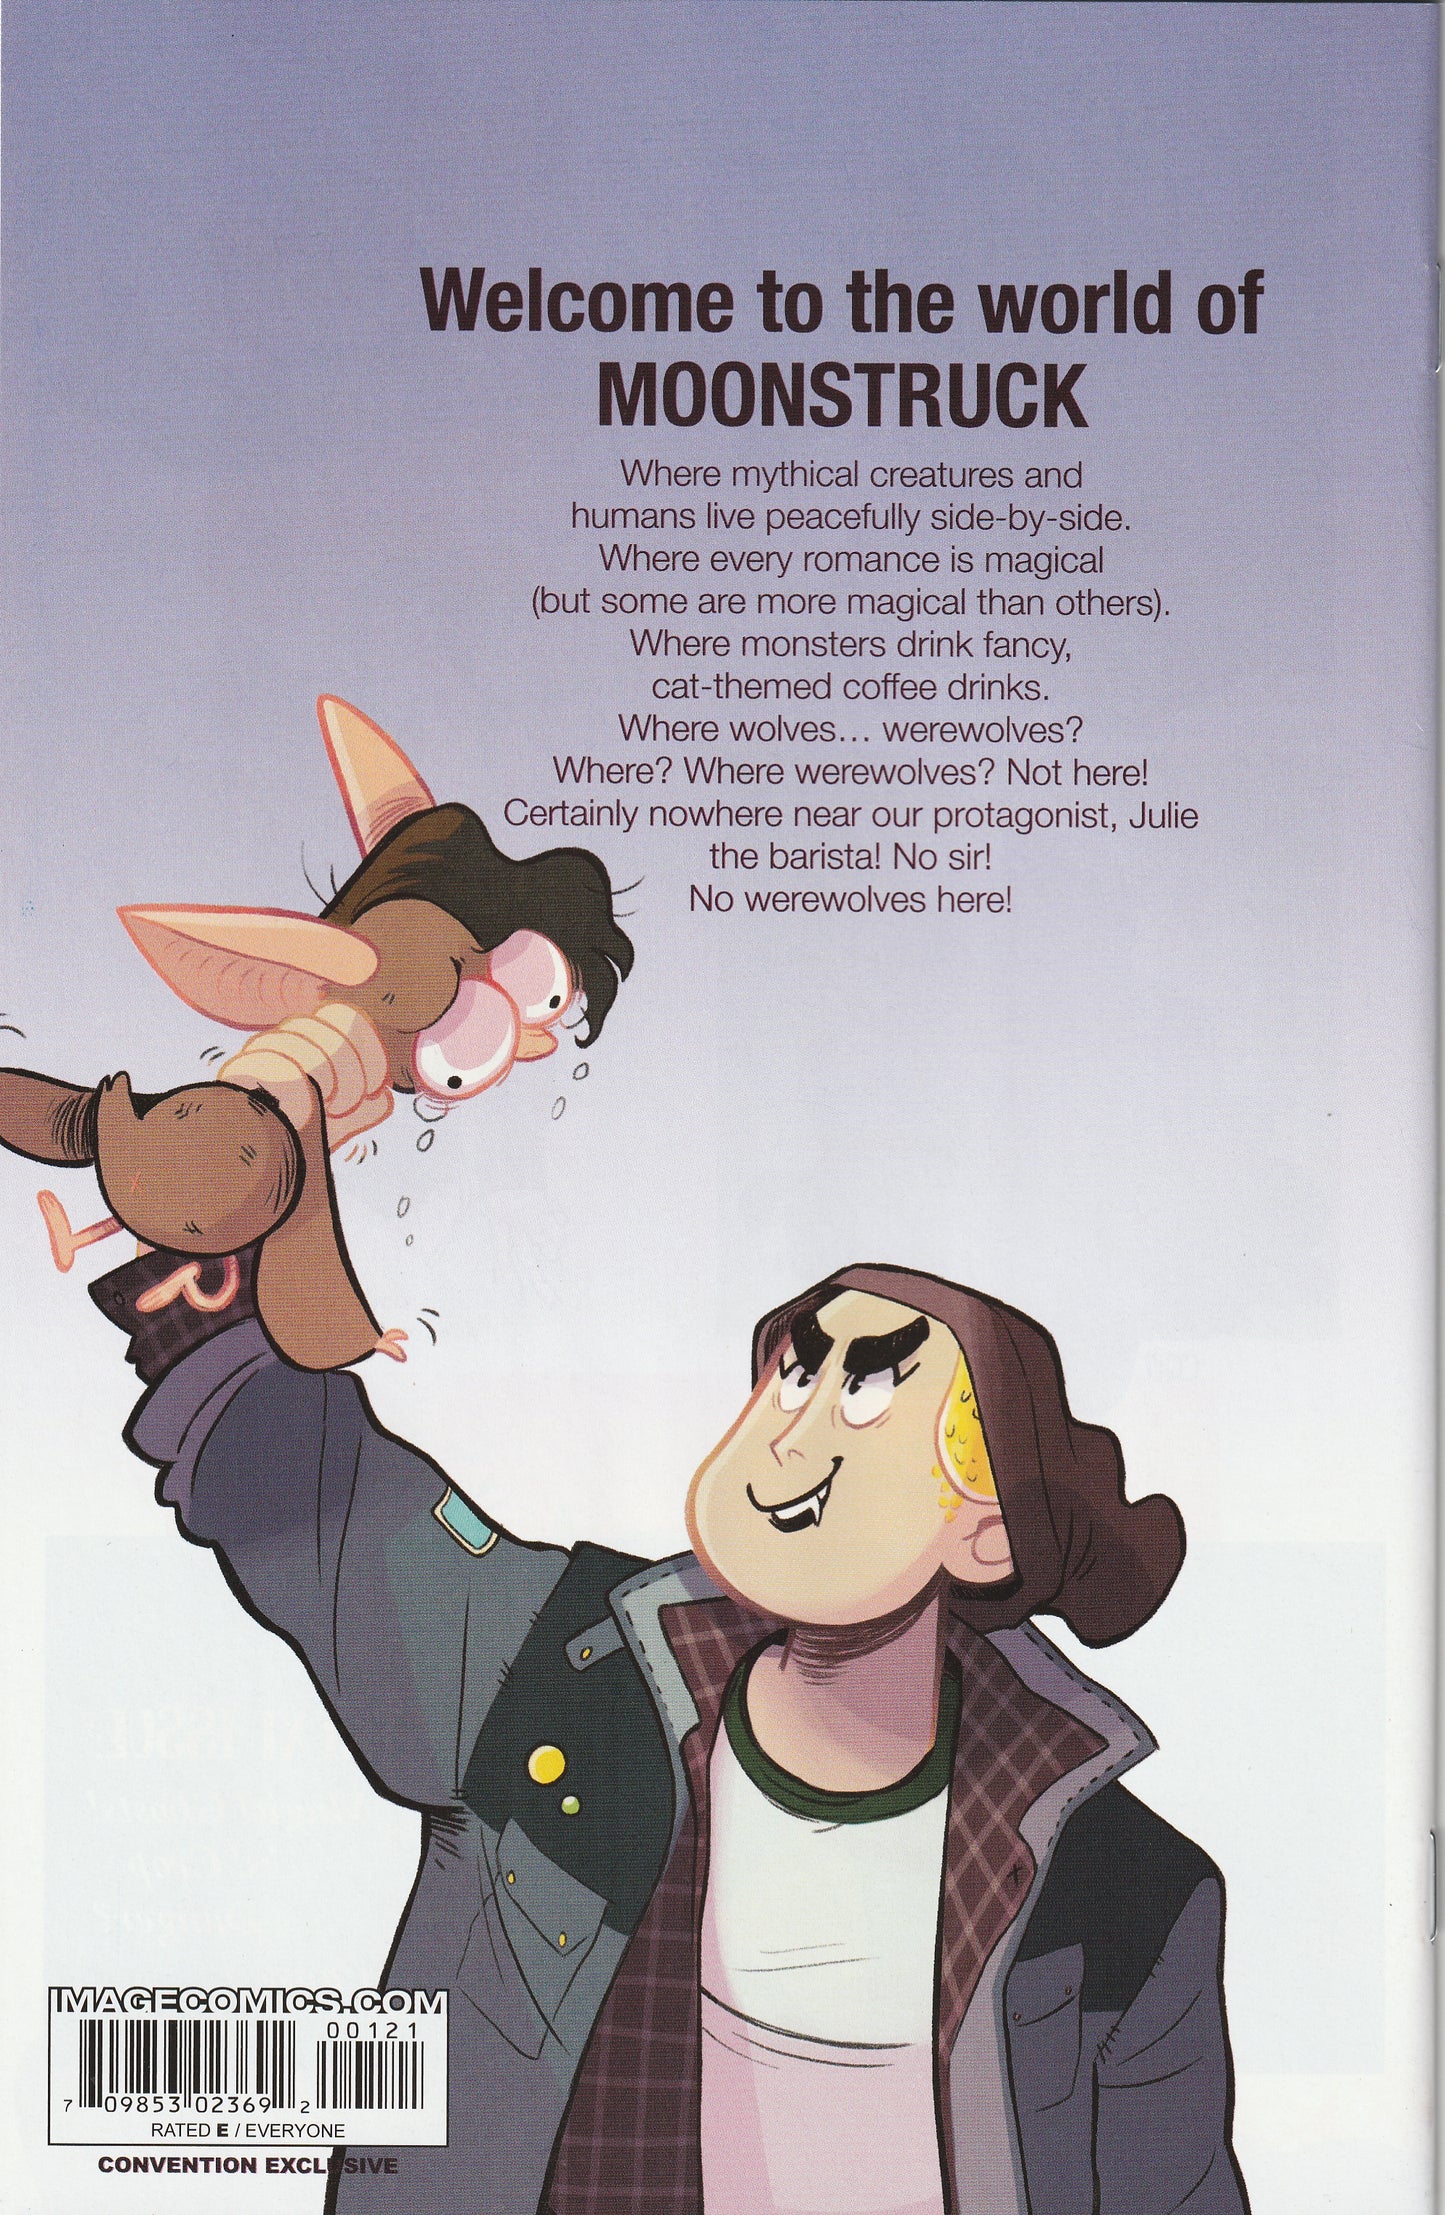 Moonstruck #1 (2017) - San Diego Comic-Con 2017 Previews Exclusive Shae Beagle Variant Cover